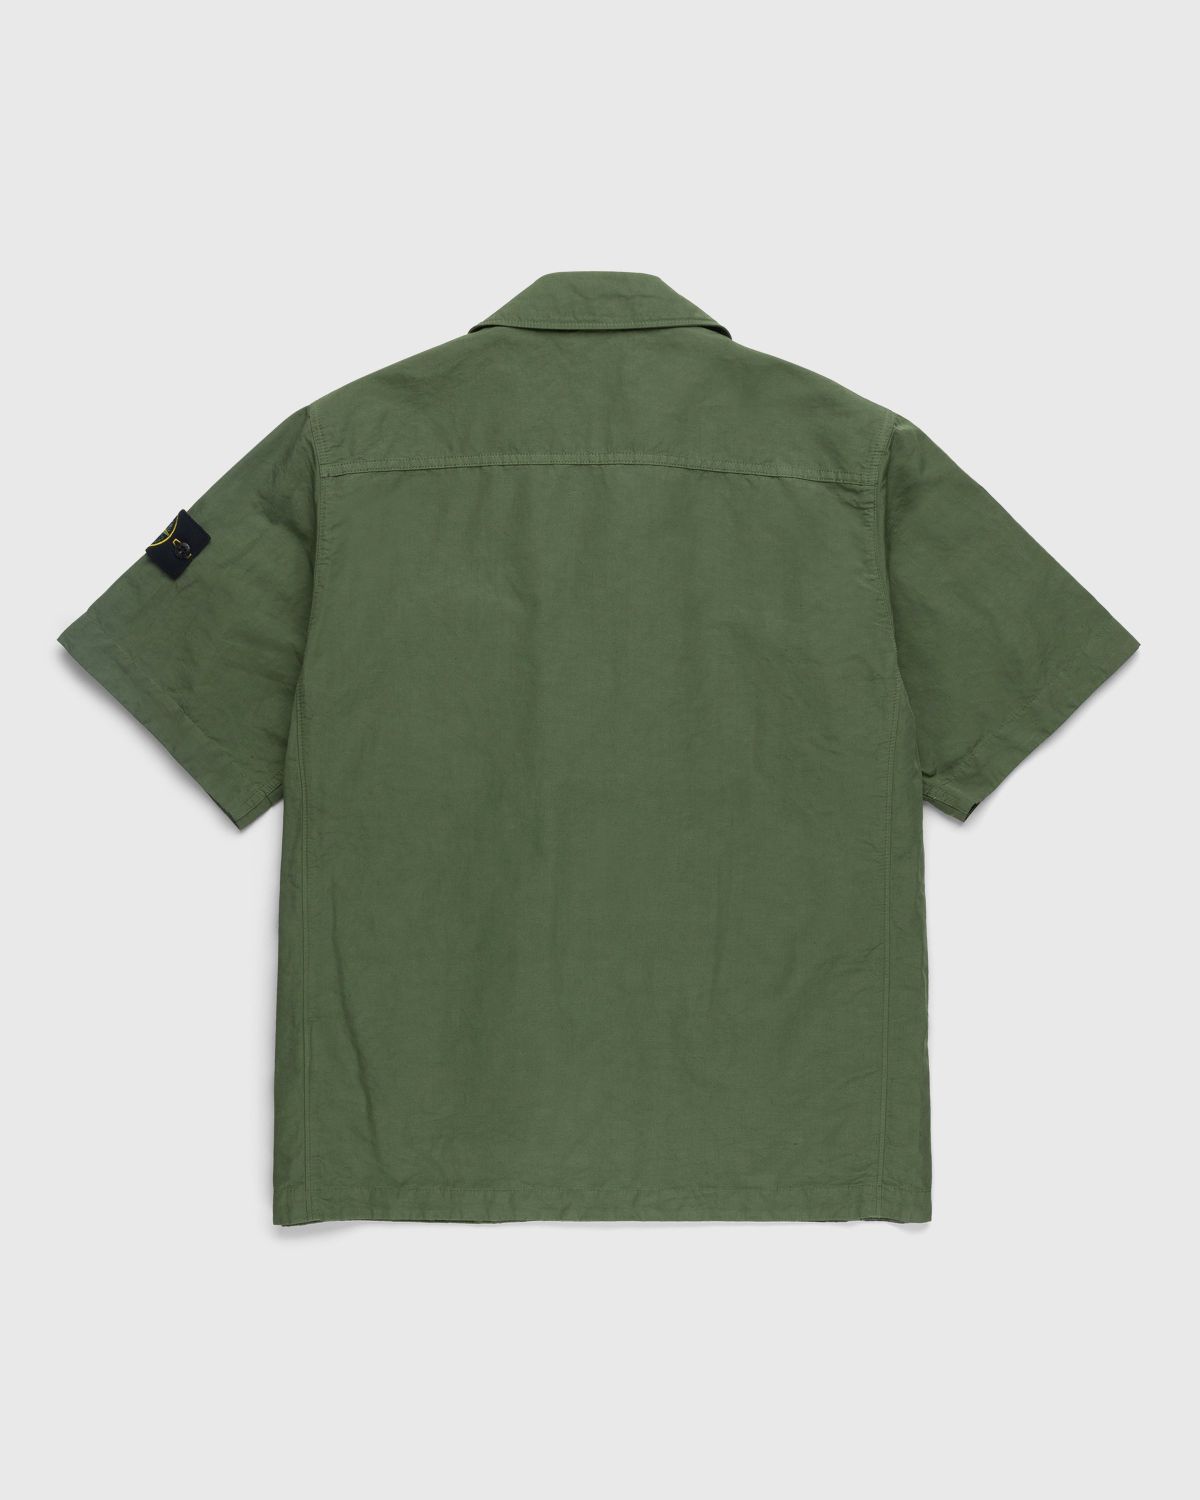 Stone Island – 42406 Garment-Dyed Shirt Jacket With Detachable Vest Olive - Outerwear - Green - Image 2